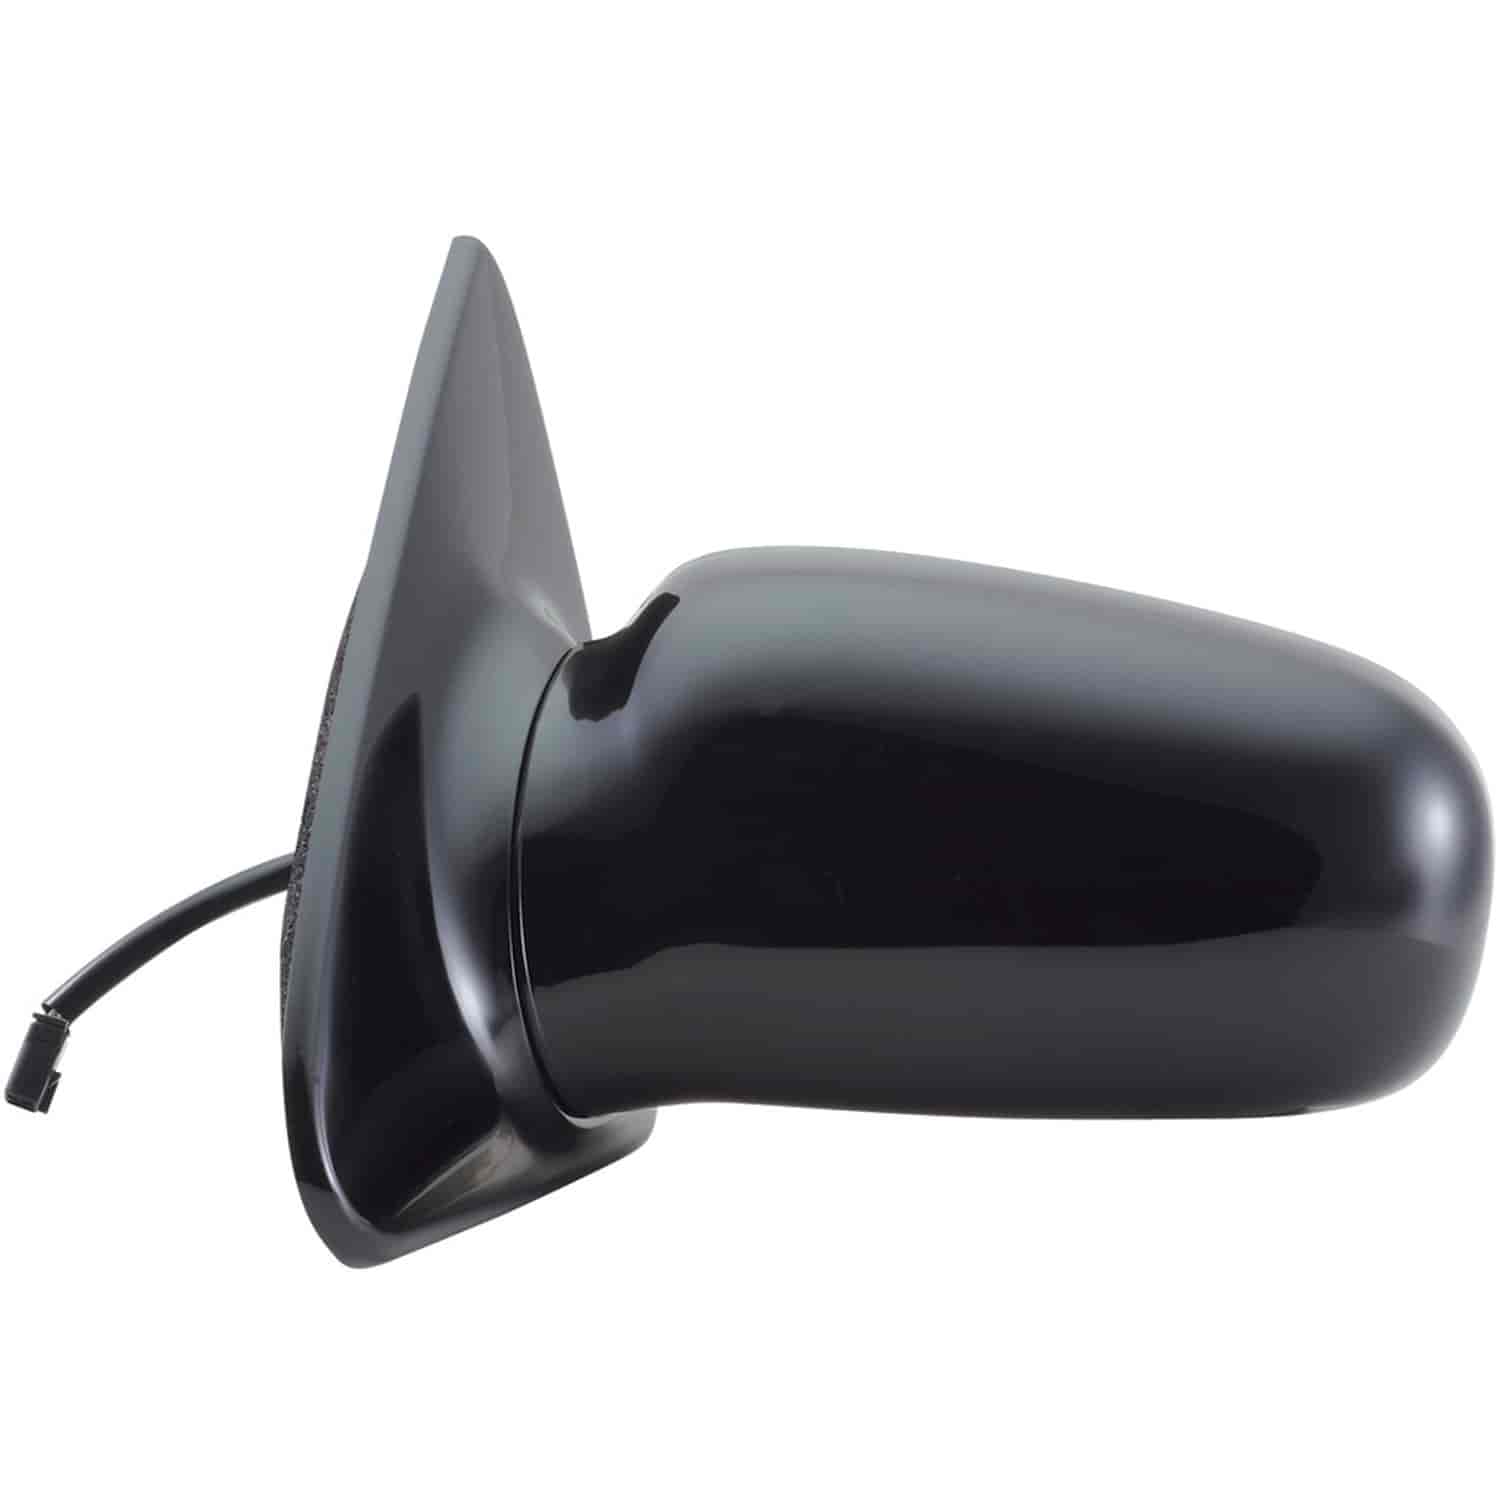 OEM Style Replacement mirror for 95-05 Chevrolet Cavalier